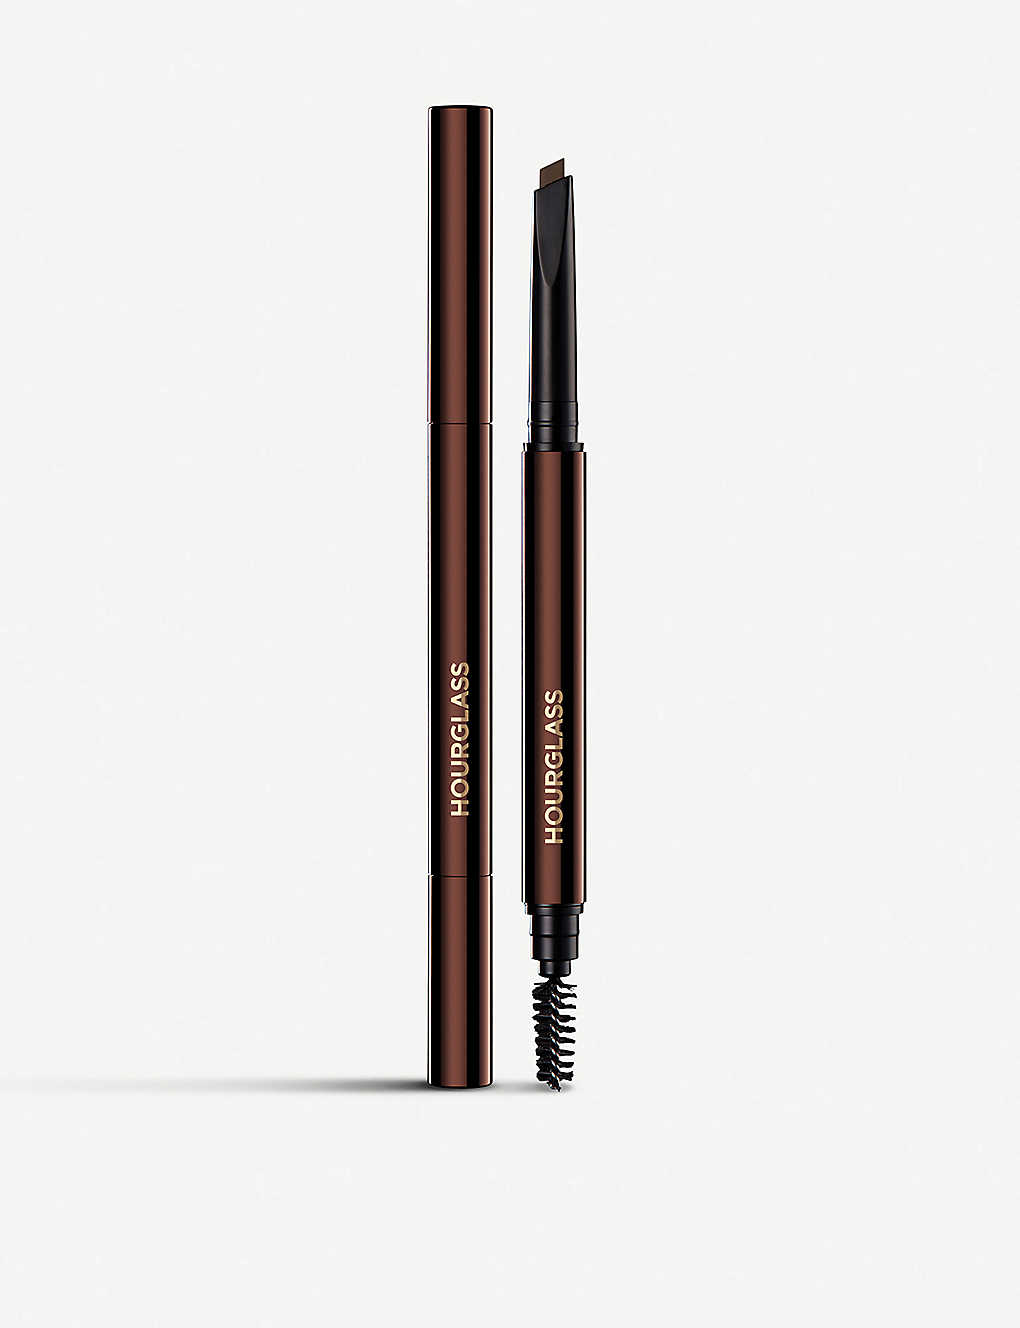 Hourglass Arch Brow Sculpting Pencil In Warm Blonde